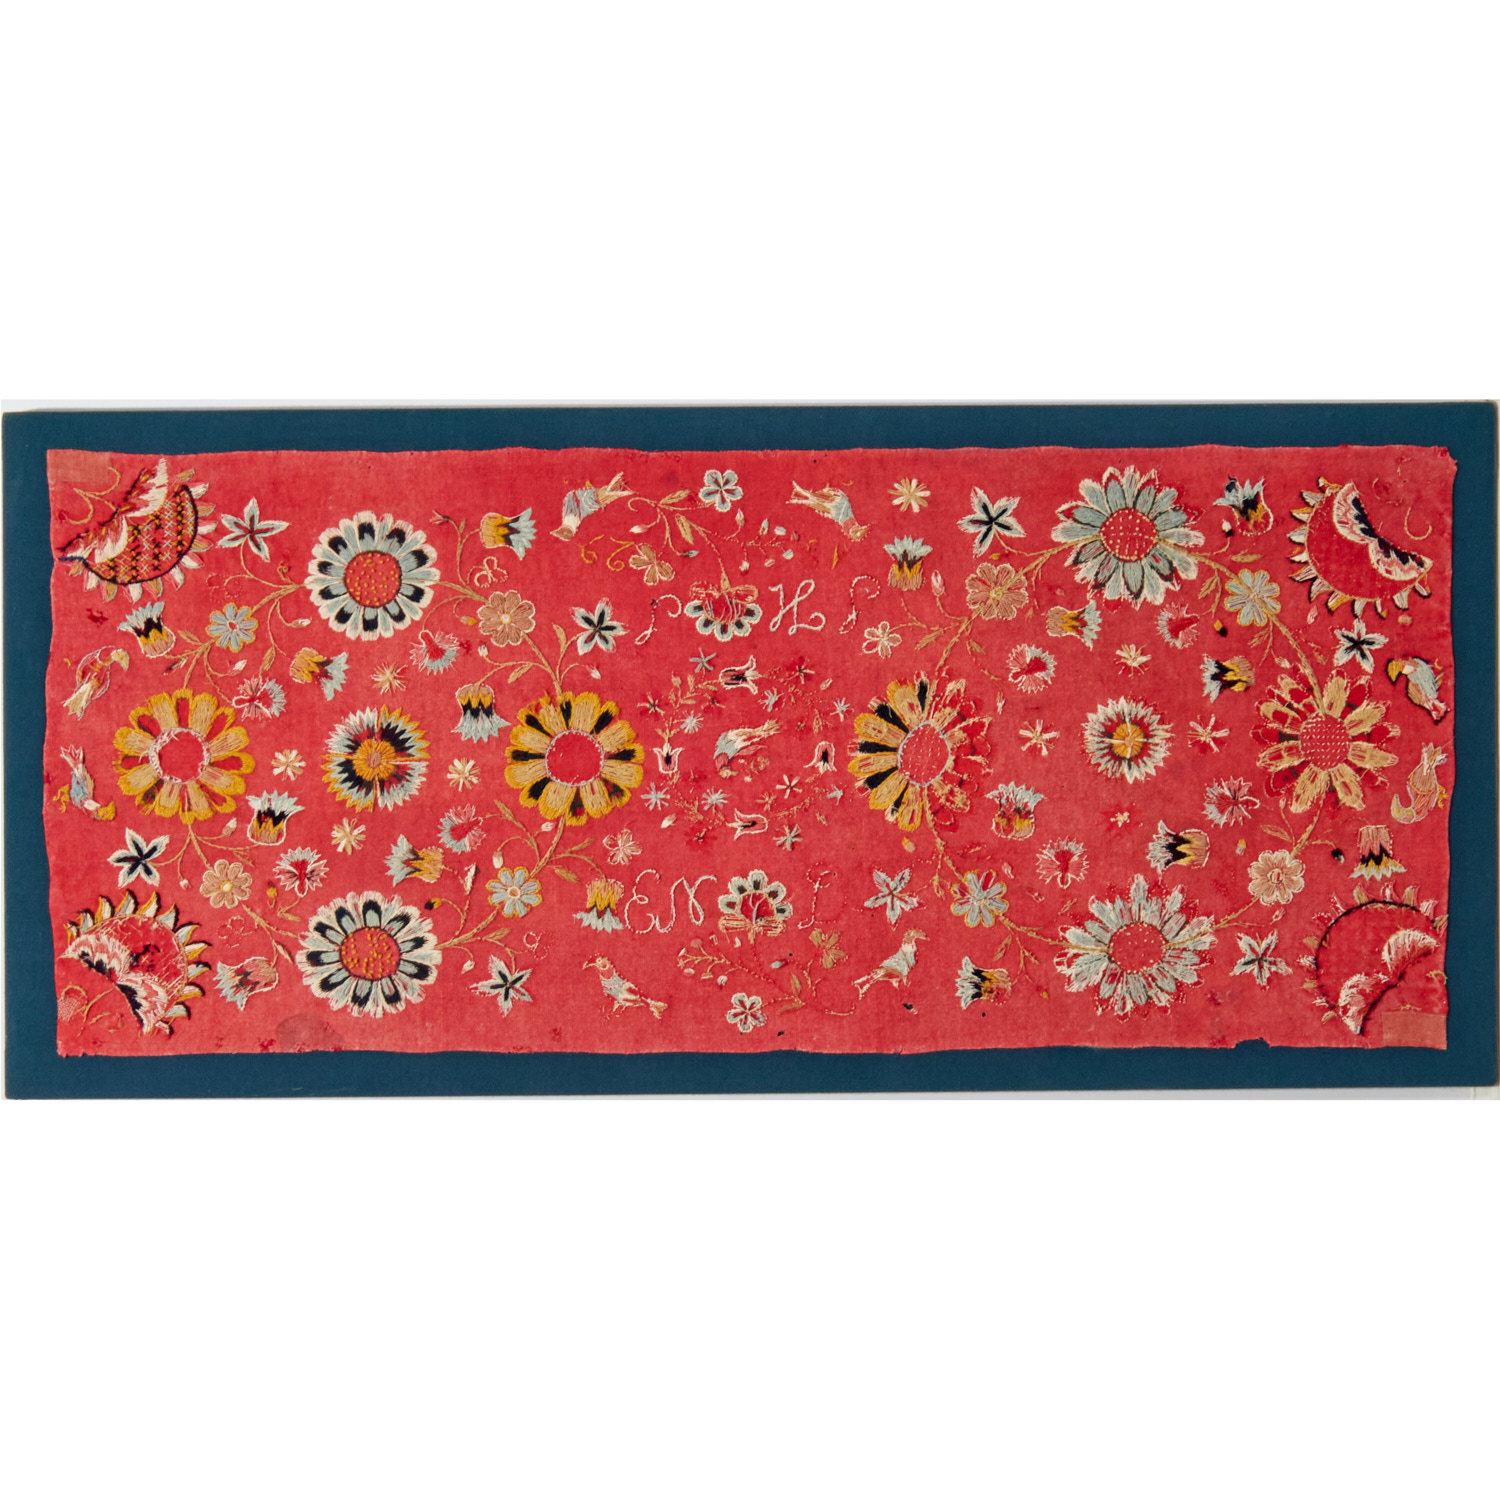 SWEDISH AGEDYNA EMBROIDERED TEXTILE 360d0a